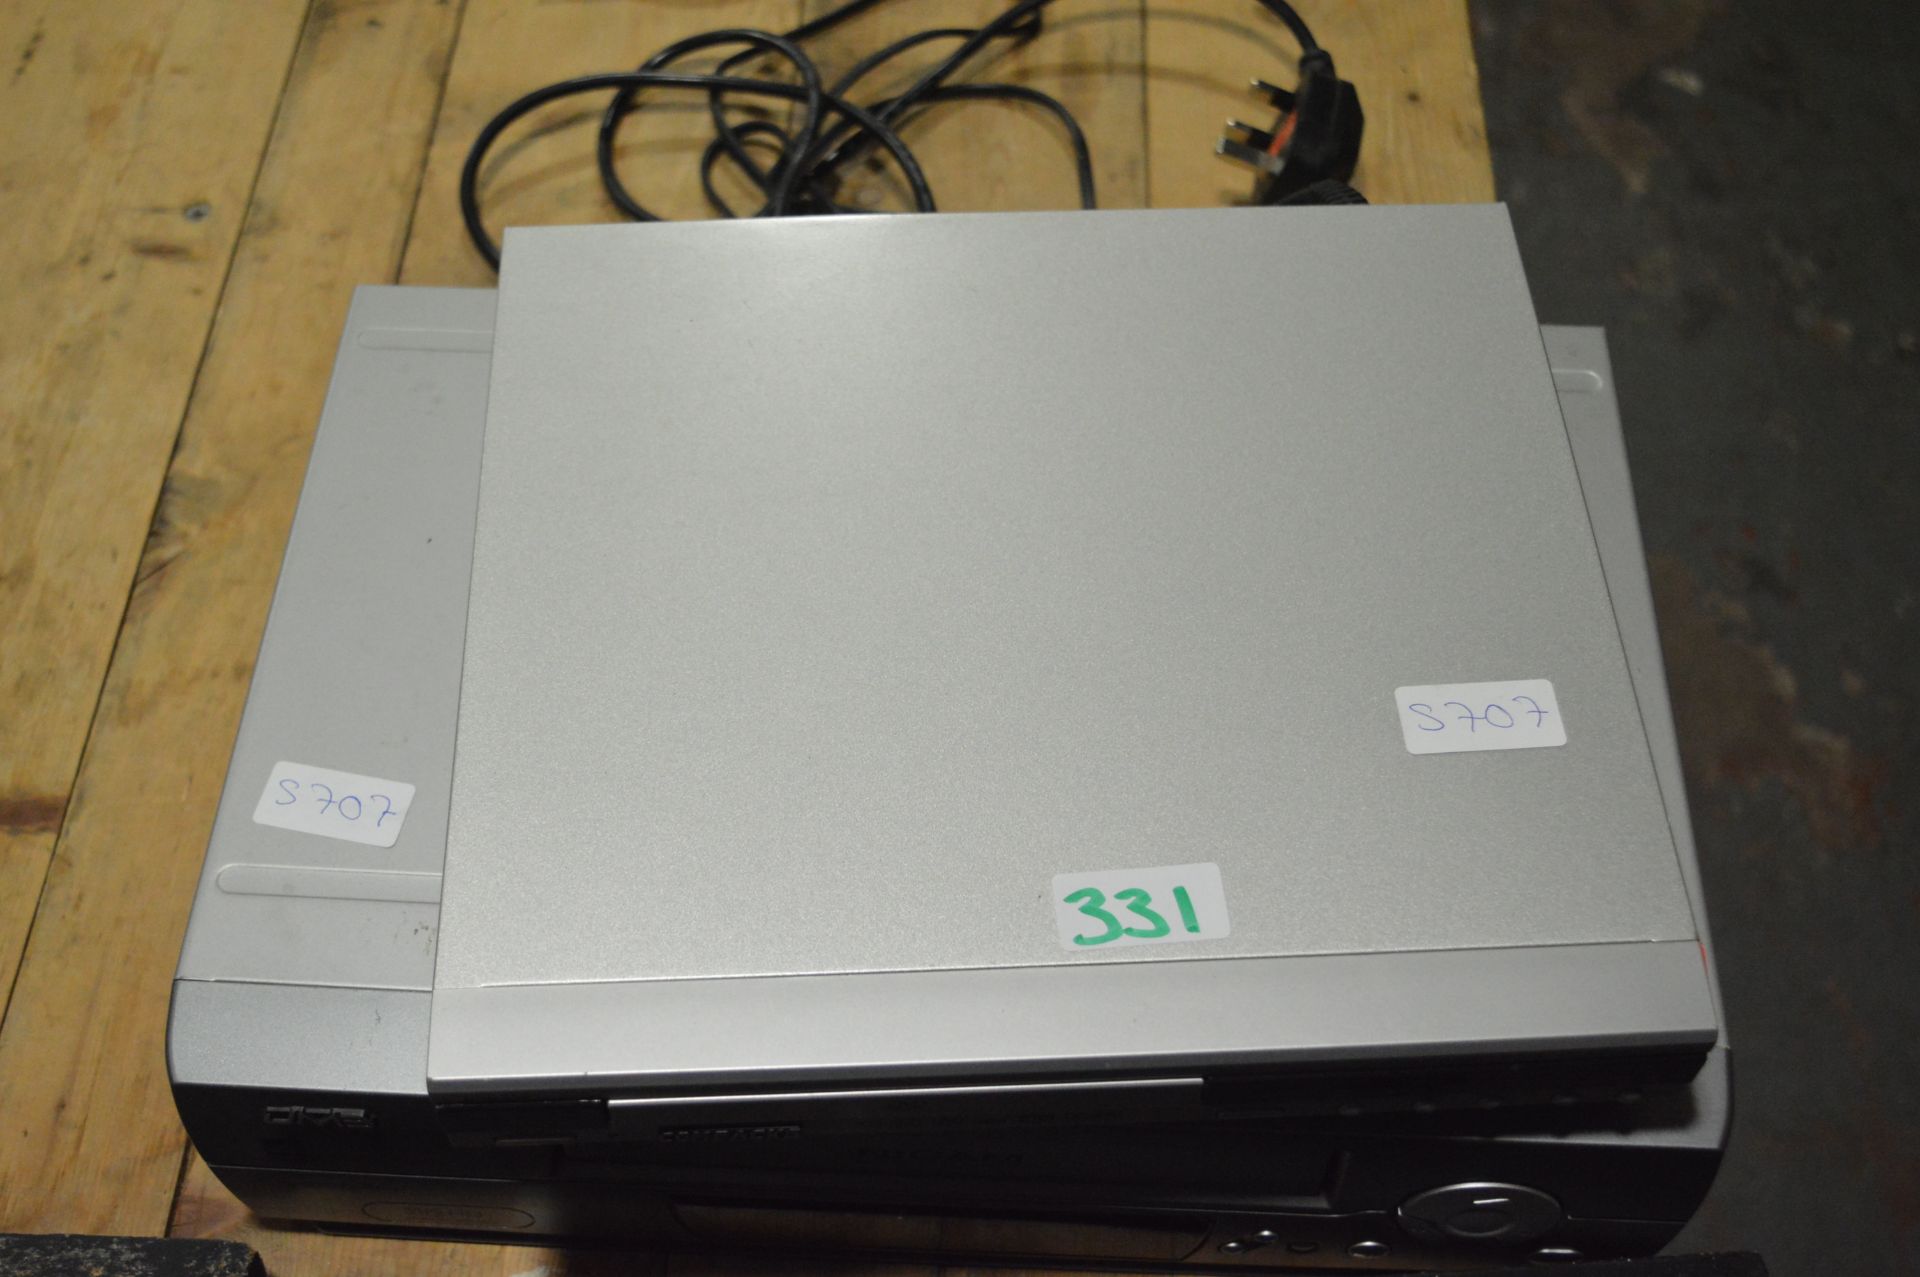 Compaks DVD800 and a JMB Video Player